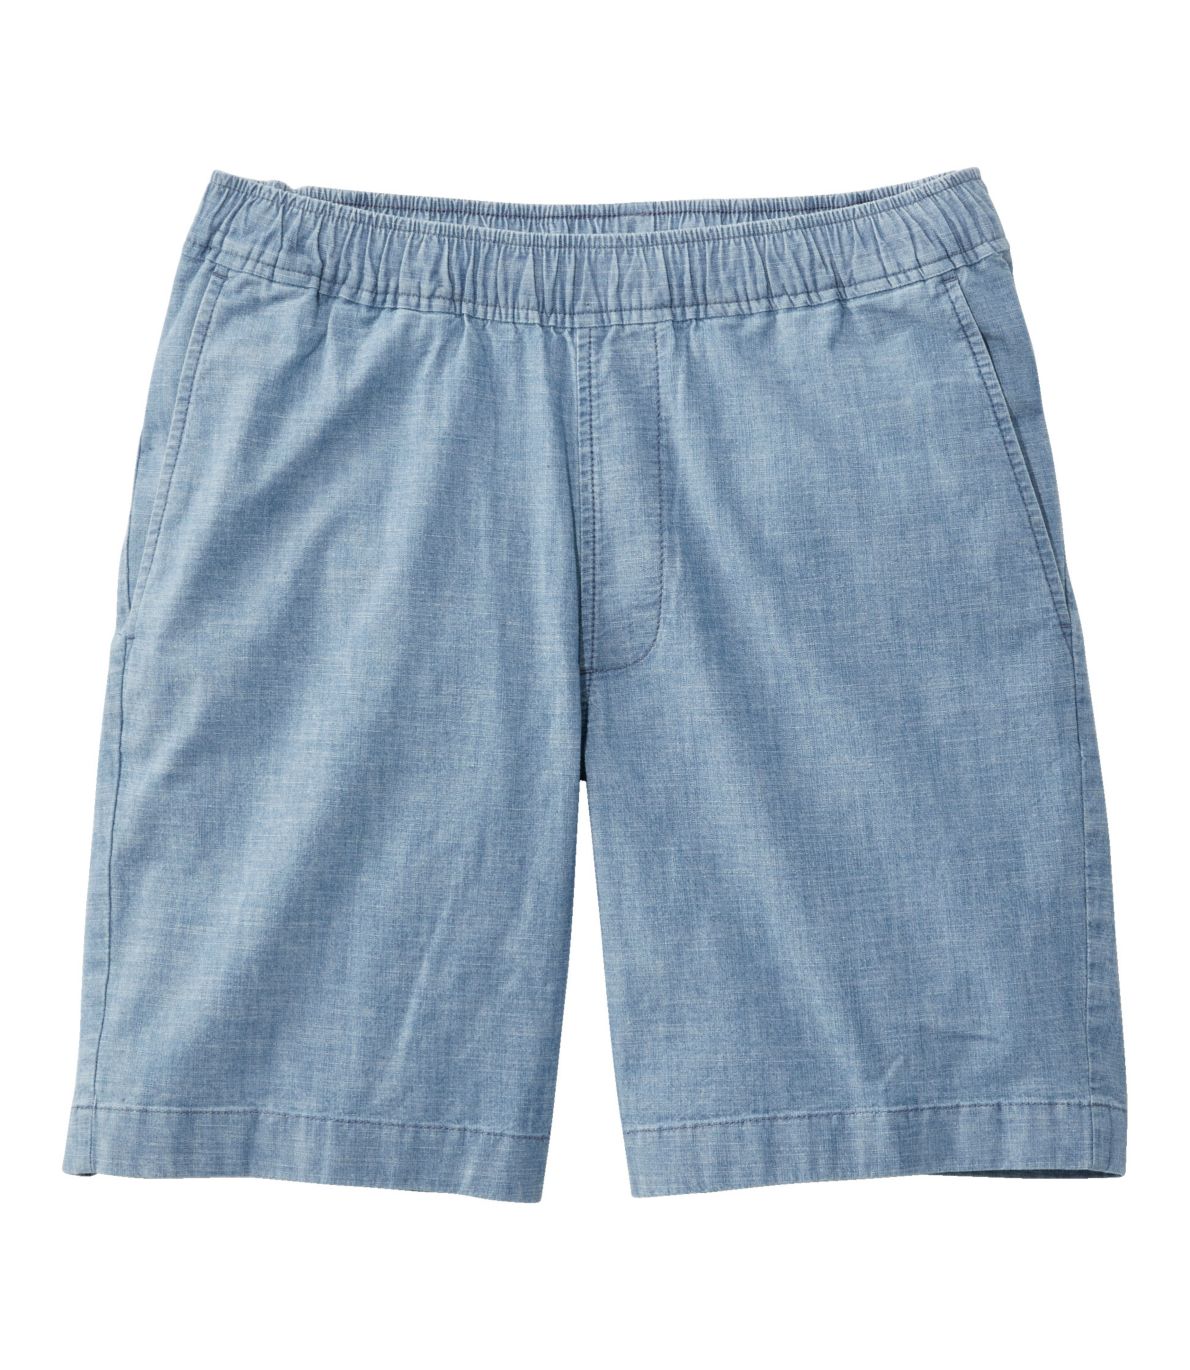 Men's Lakewashed Stretch Shorts, Pull-On, Chambray, 8"